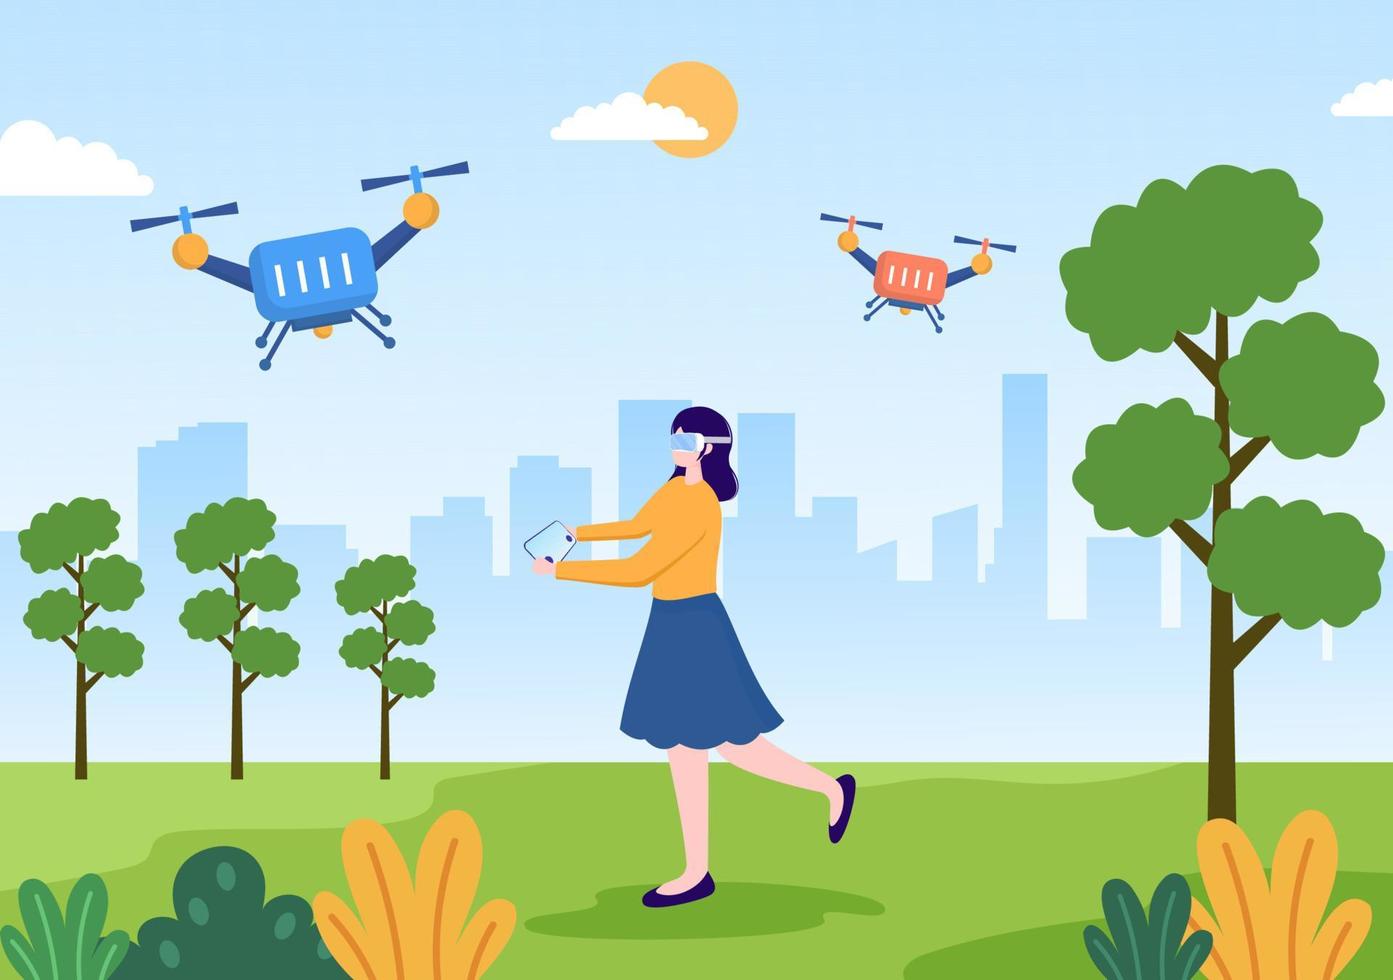 Drone with Camera Remote Control Driven Flying Over to Taking Photography and Video Recording in Flat Cartoon Background illustration vector